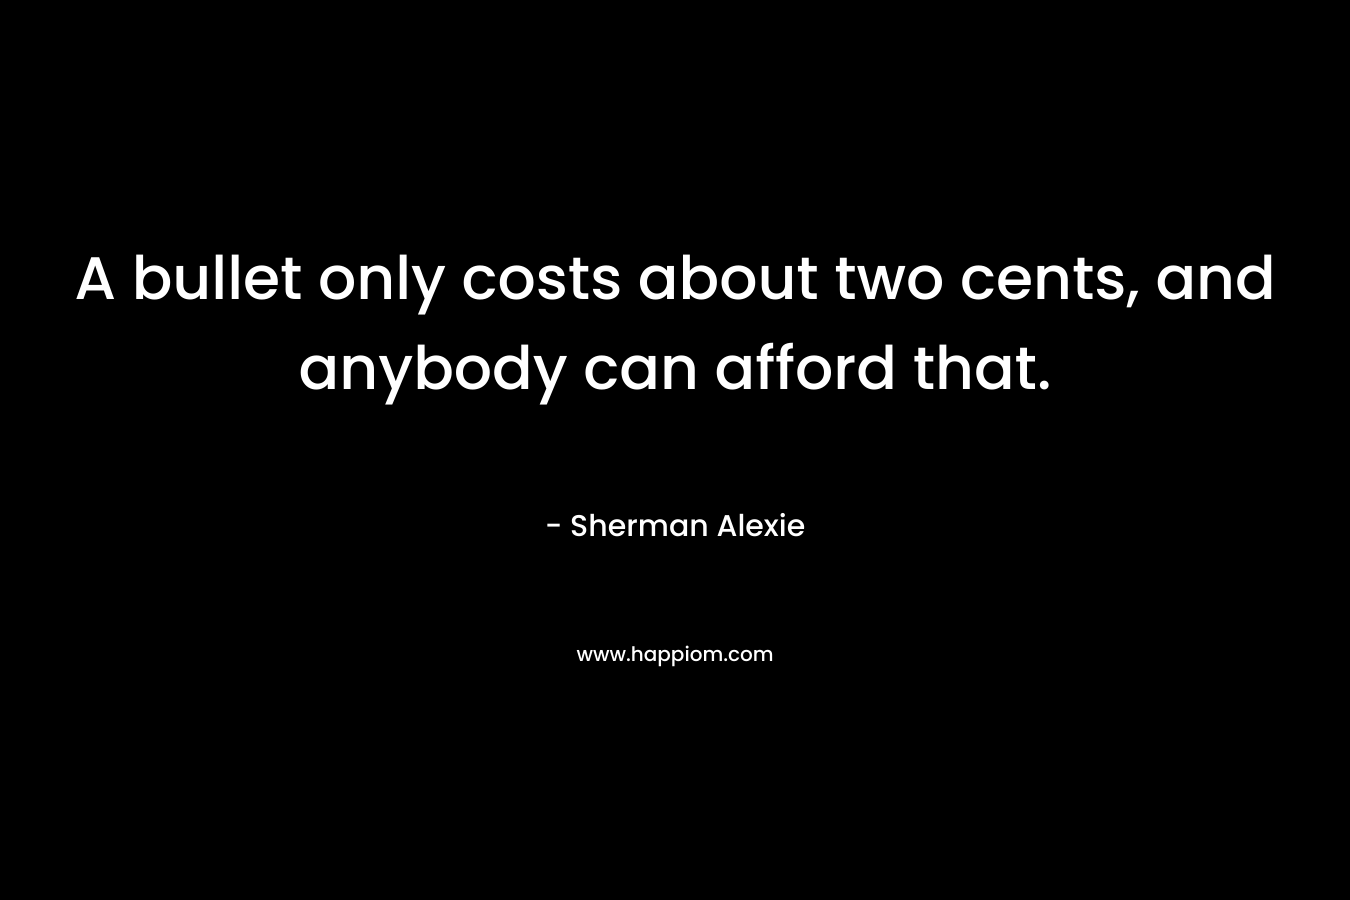 A bullet only costs about two cents, and anybody can afford that.